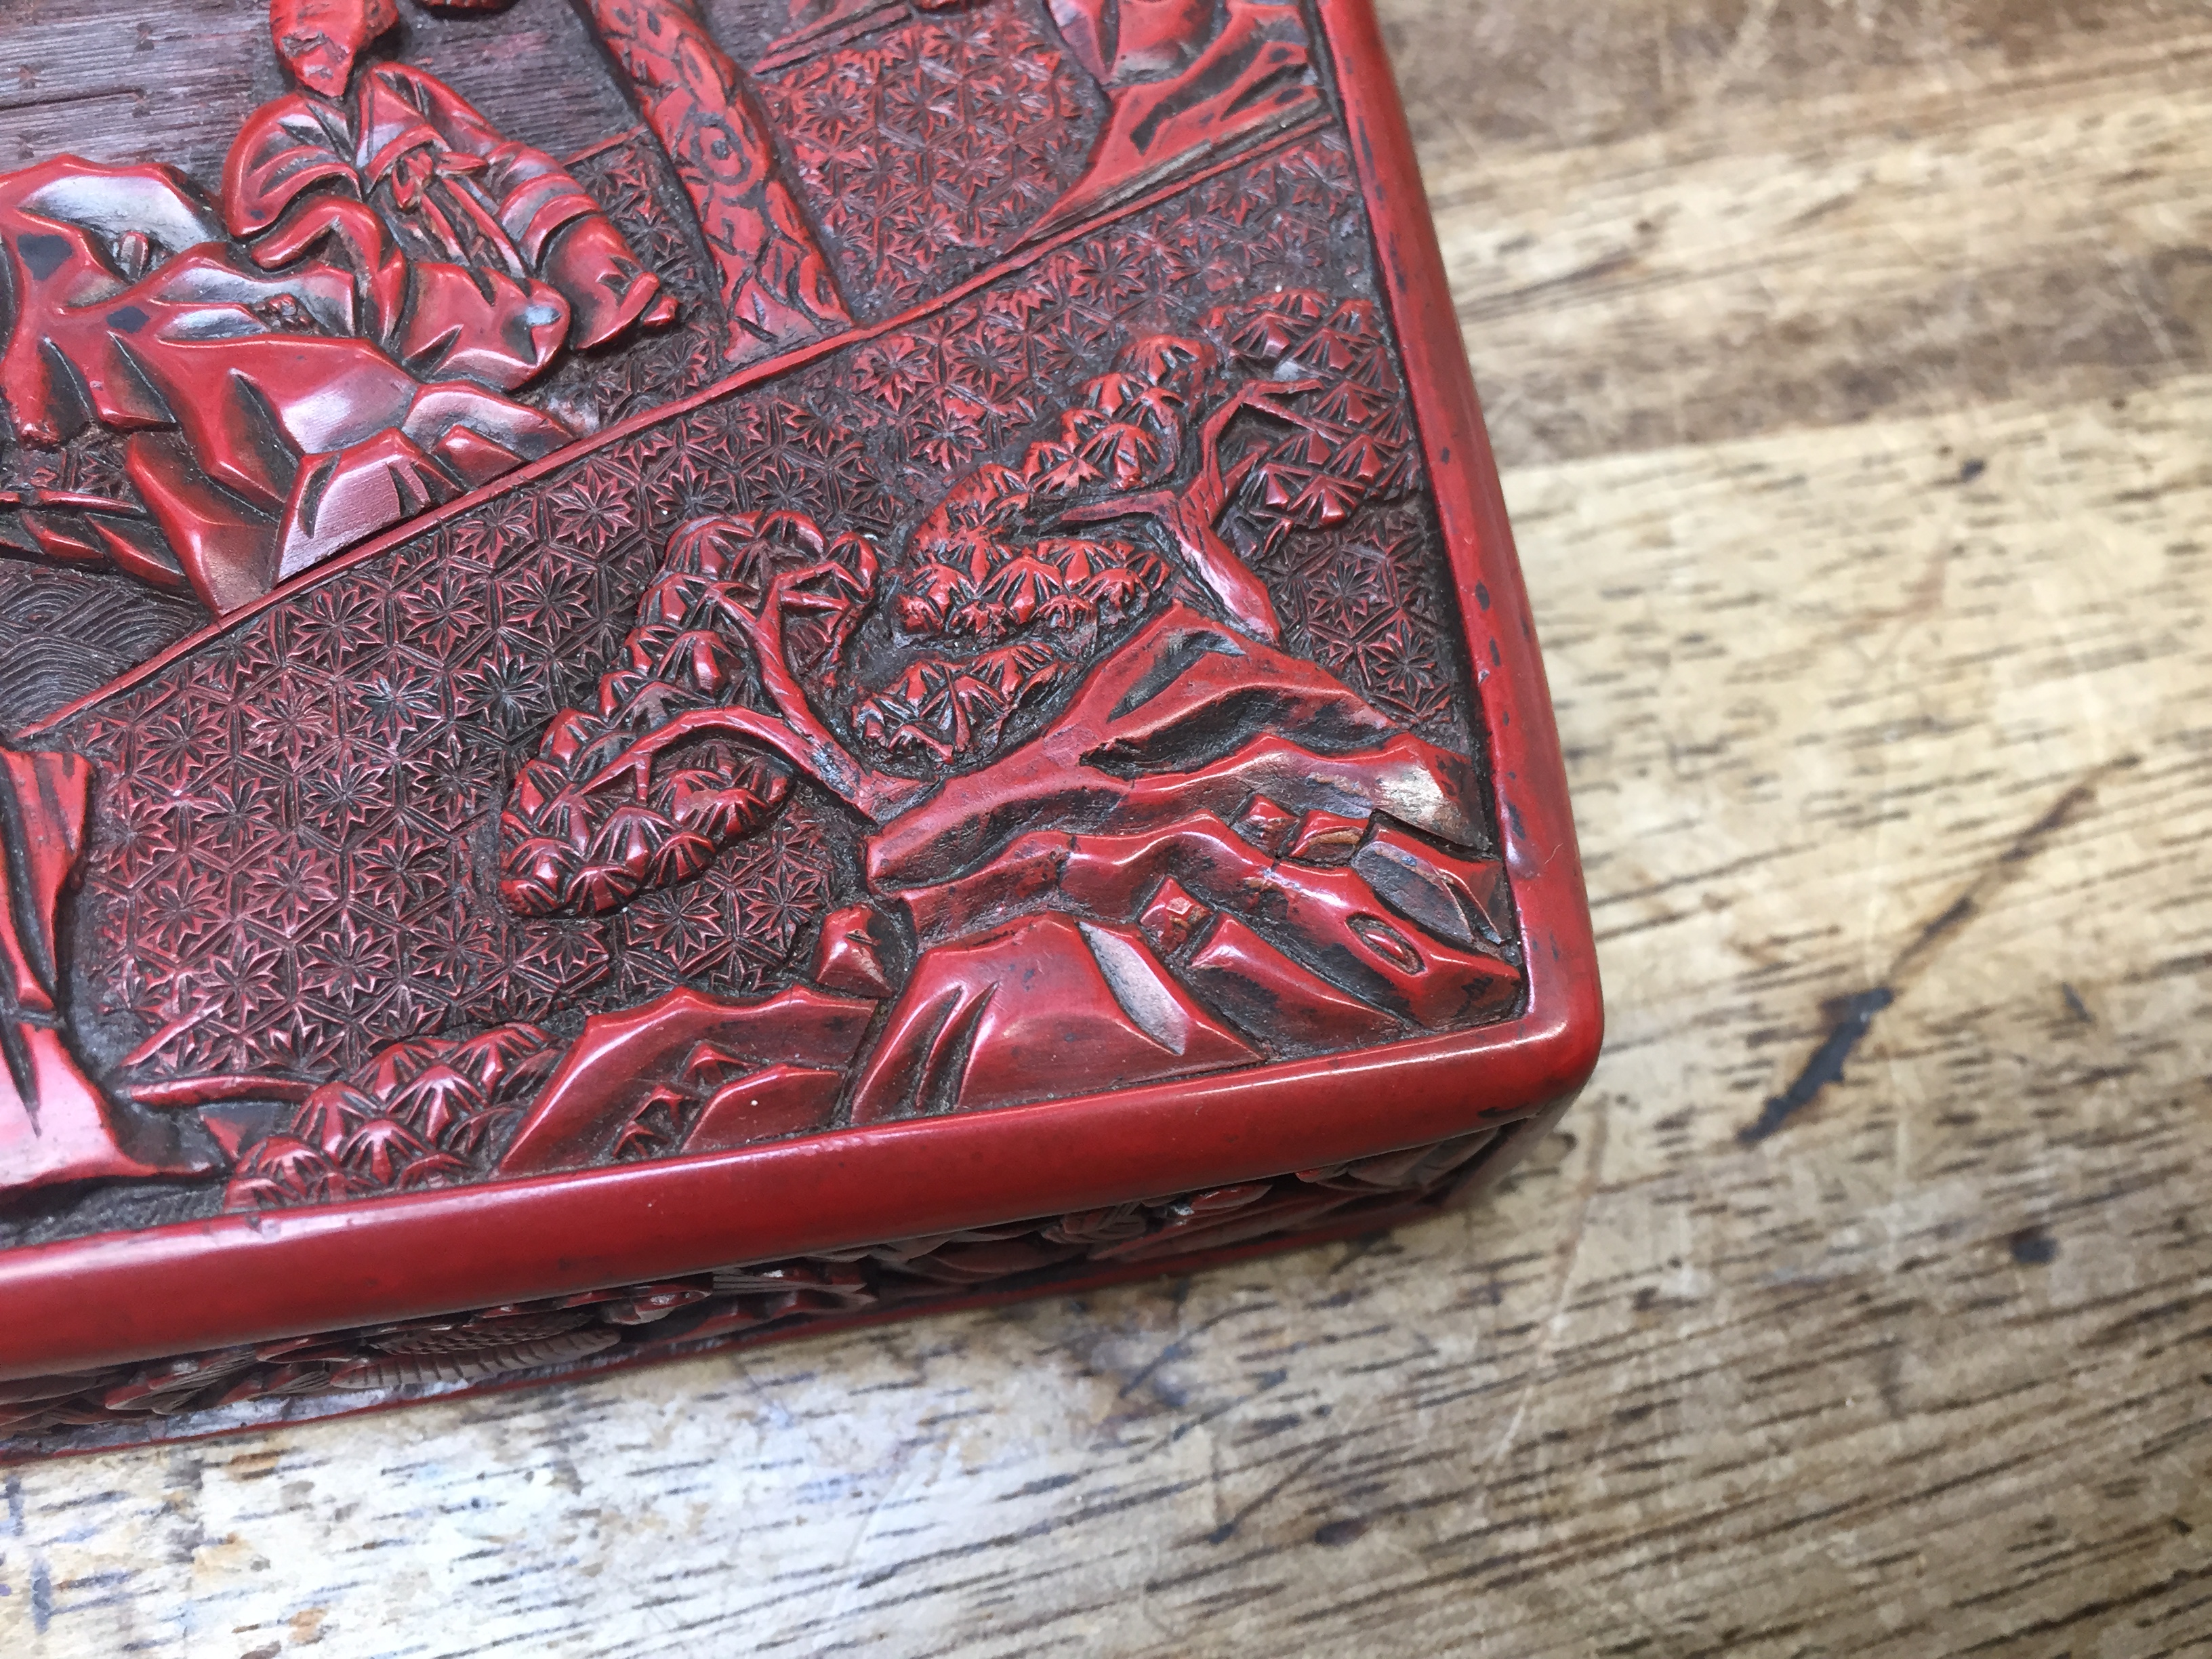 A CHINESE CINNABAR LACQUER TIERED BOX AND COVER 明 剔紅士大夫圖紋四層蓋盒 - Image 7 of 38